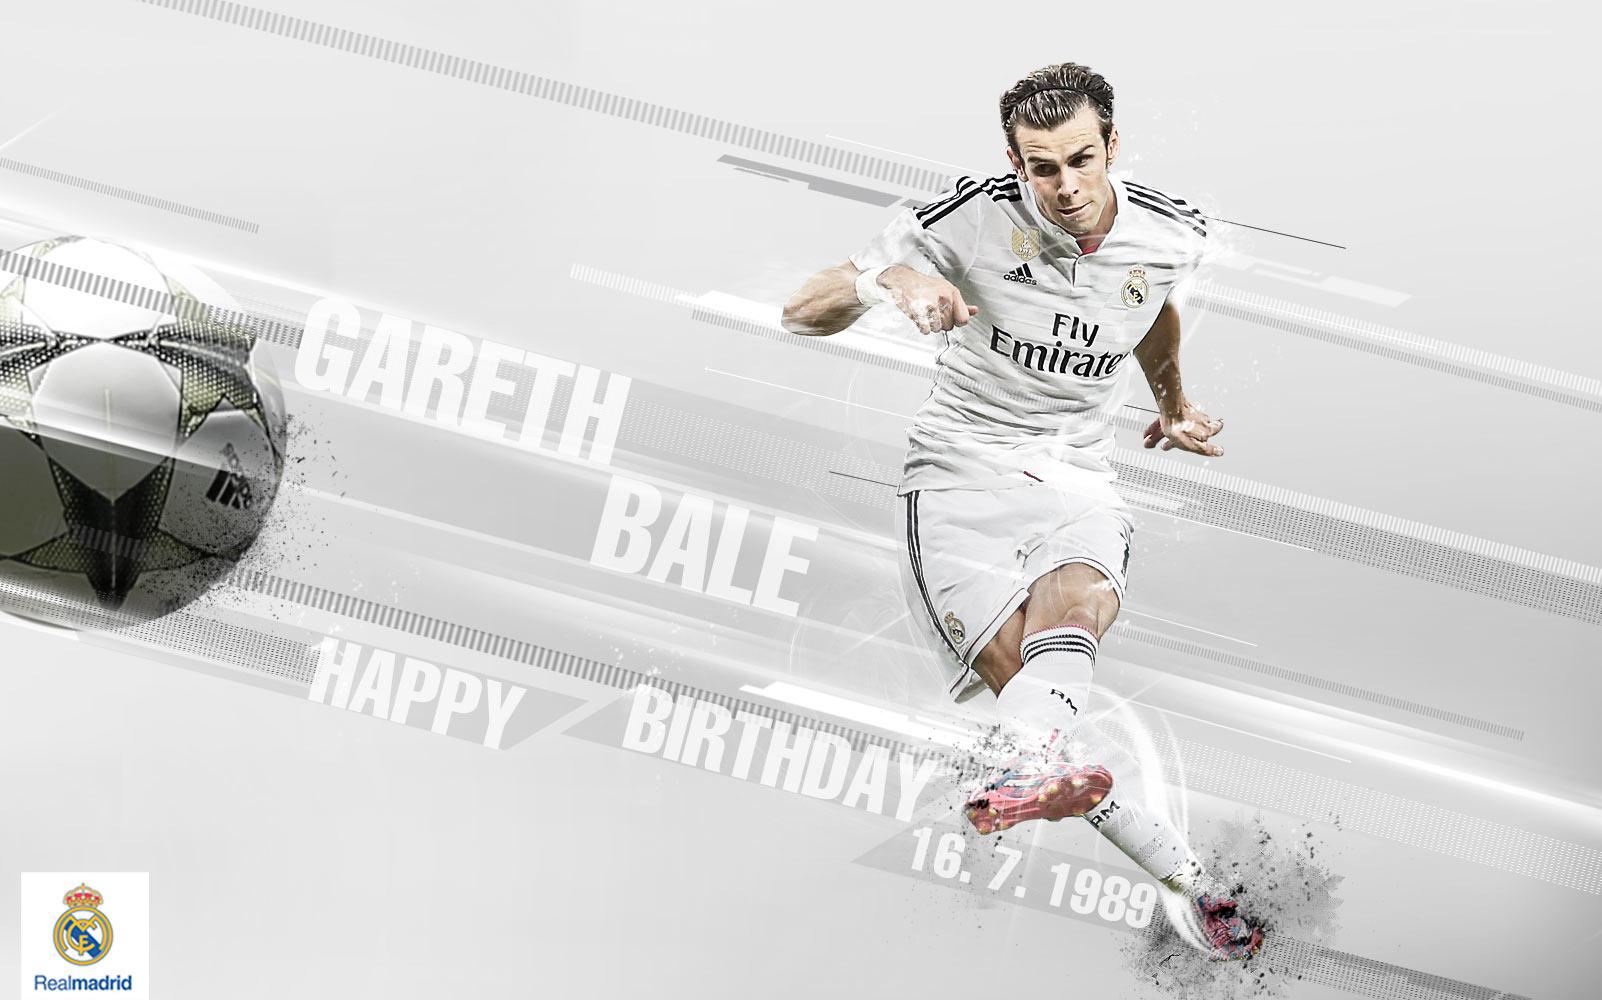 Happy birthday to Gareth Bale who turns 26 today ! 